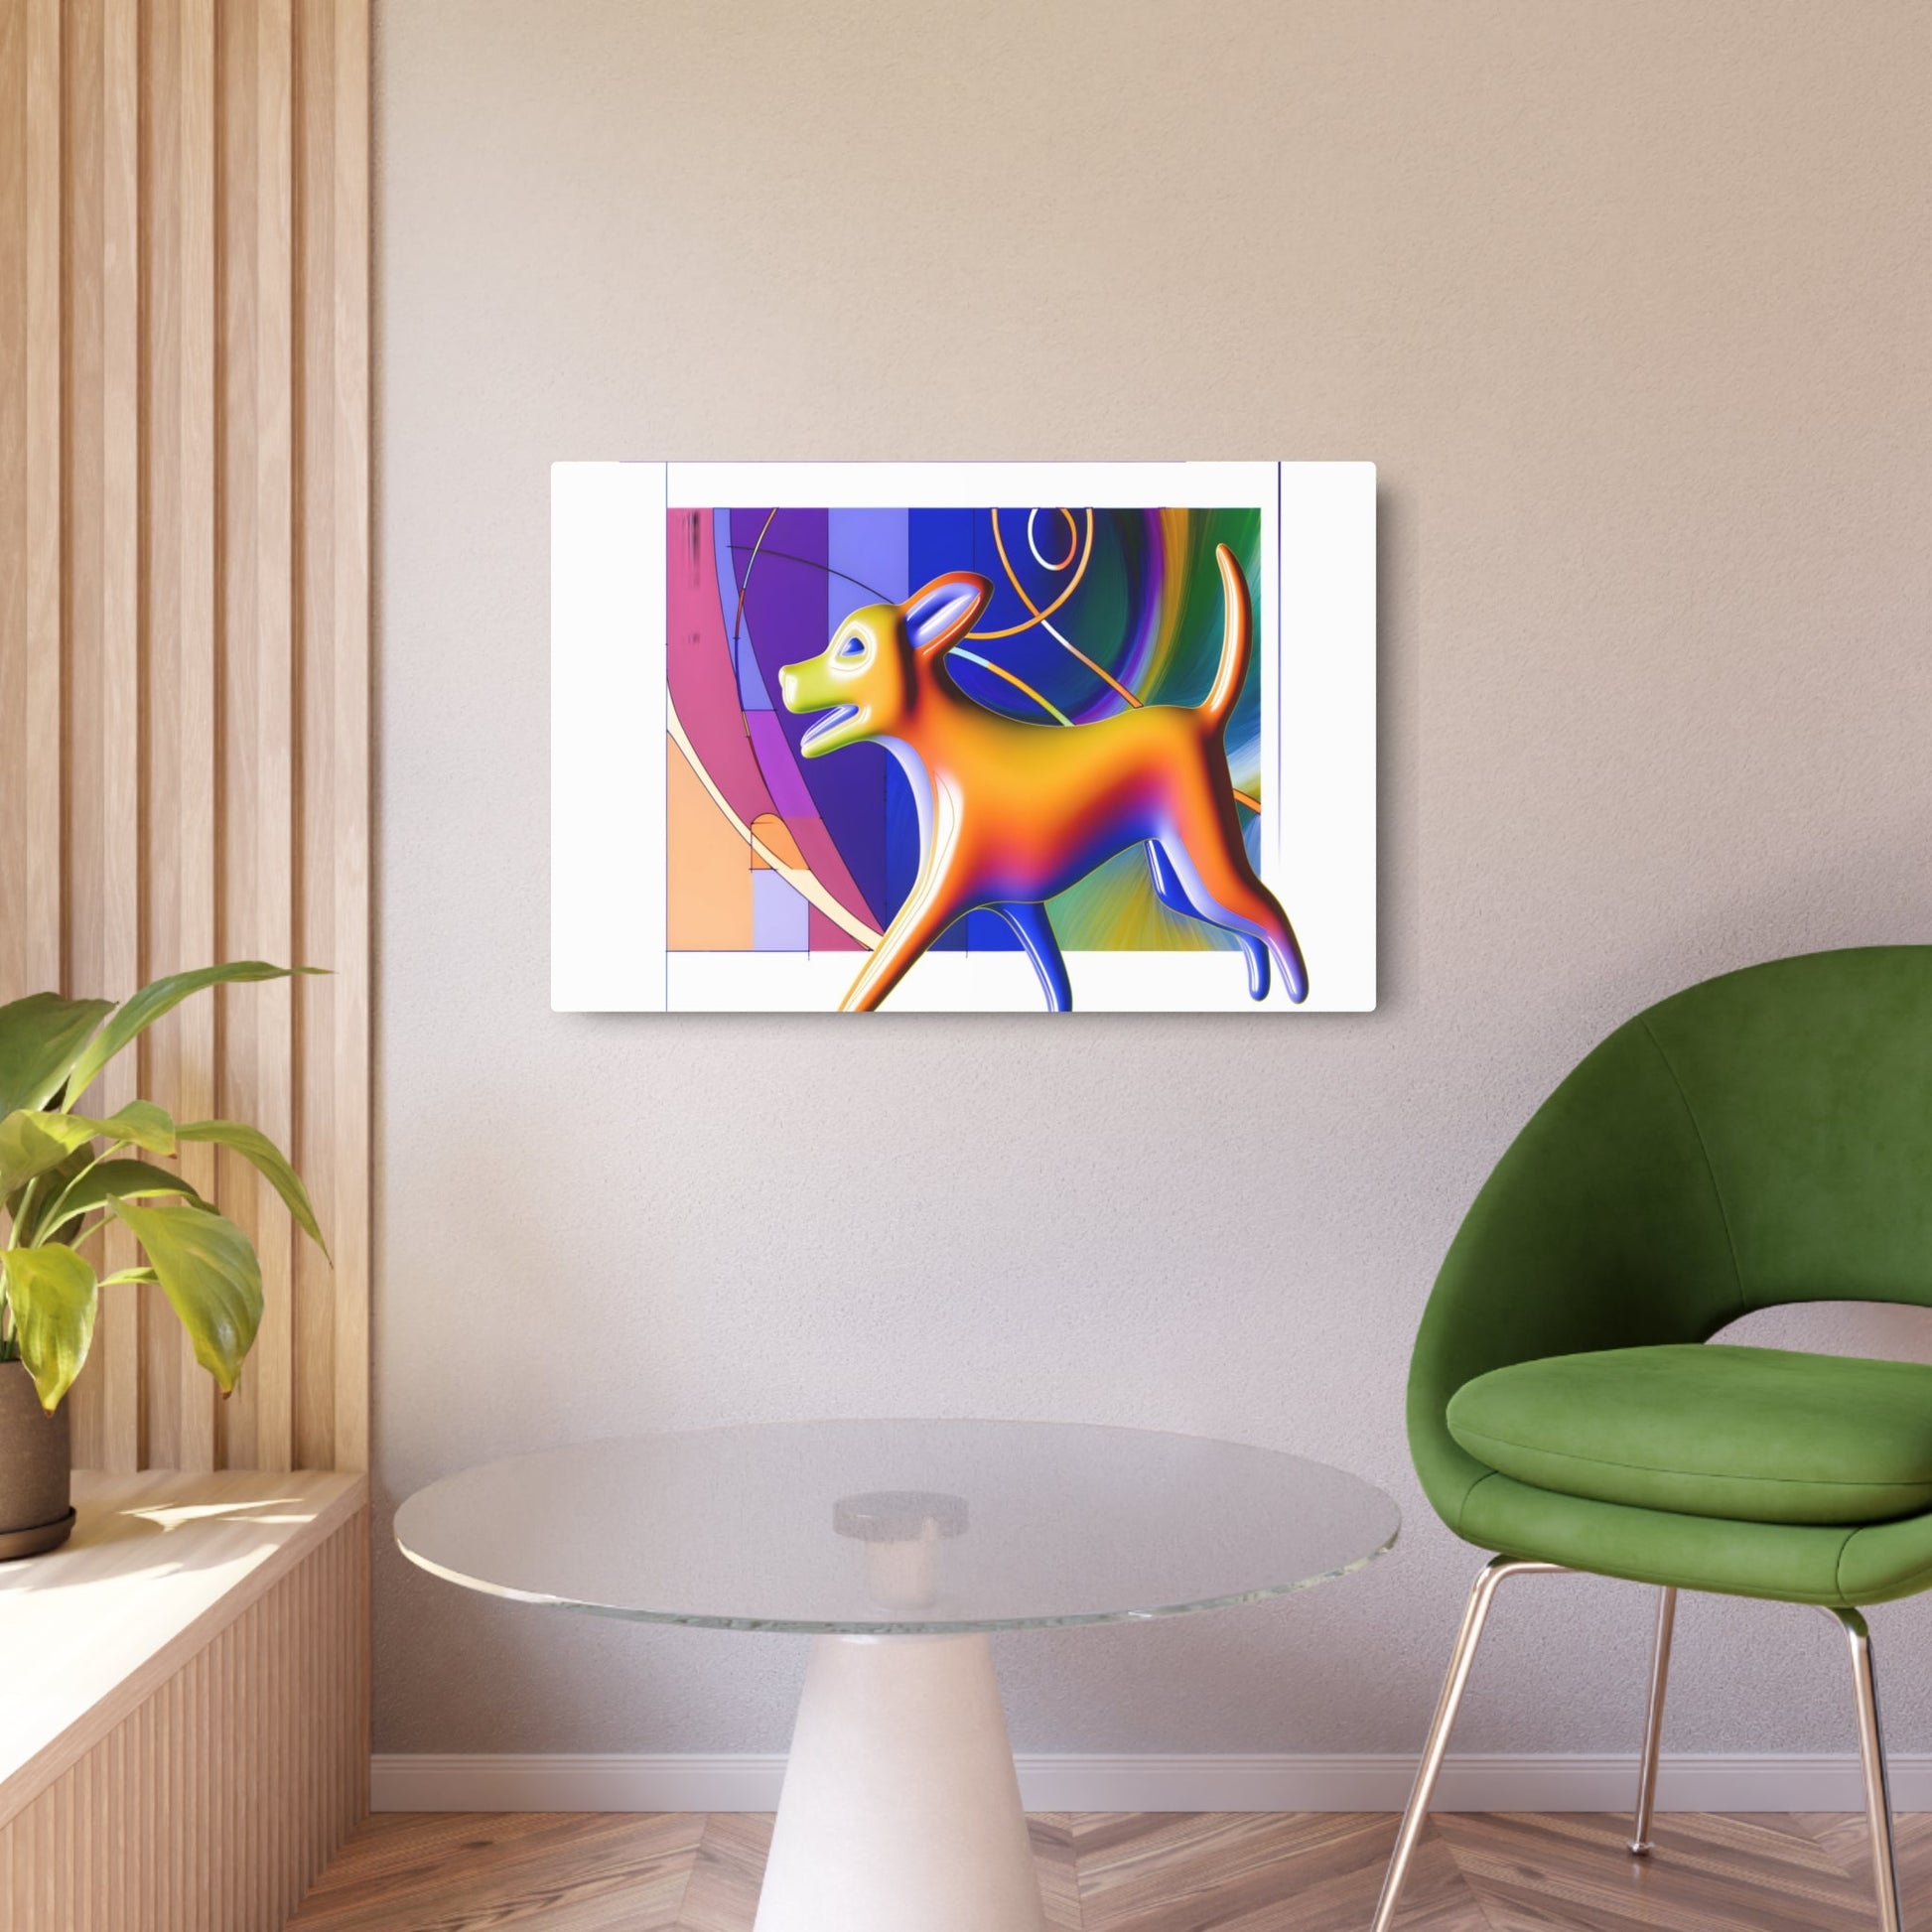 Metal Poster Art | "Modern & Contemporary Digital Art - Intricately Detailed Brightly Colored Dog in Futuristic Whimsical Landscape Illustration" - Metal Poster Art 36″ x 24″ (Horizontal) 0.12''